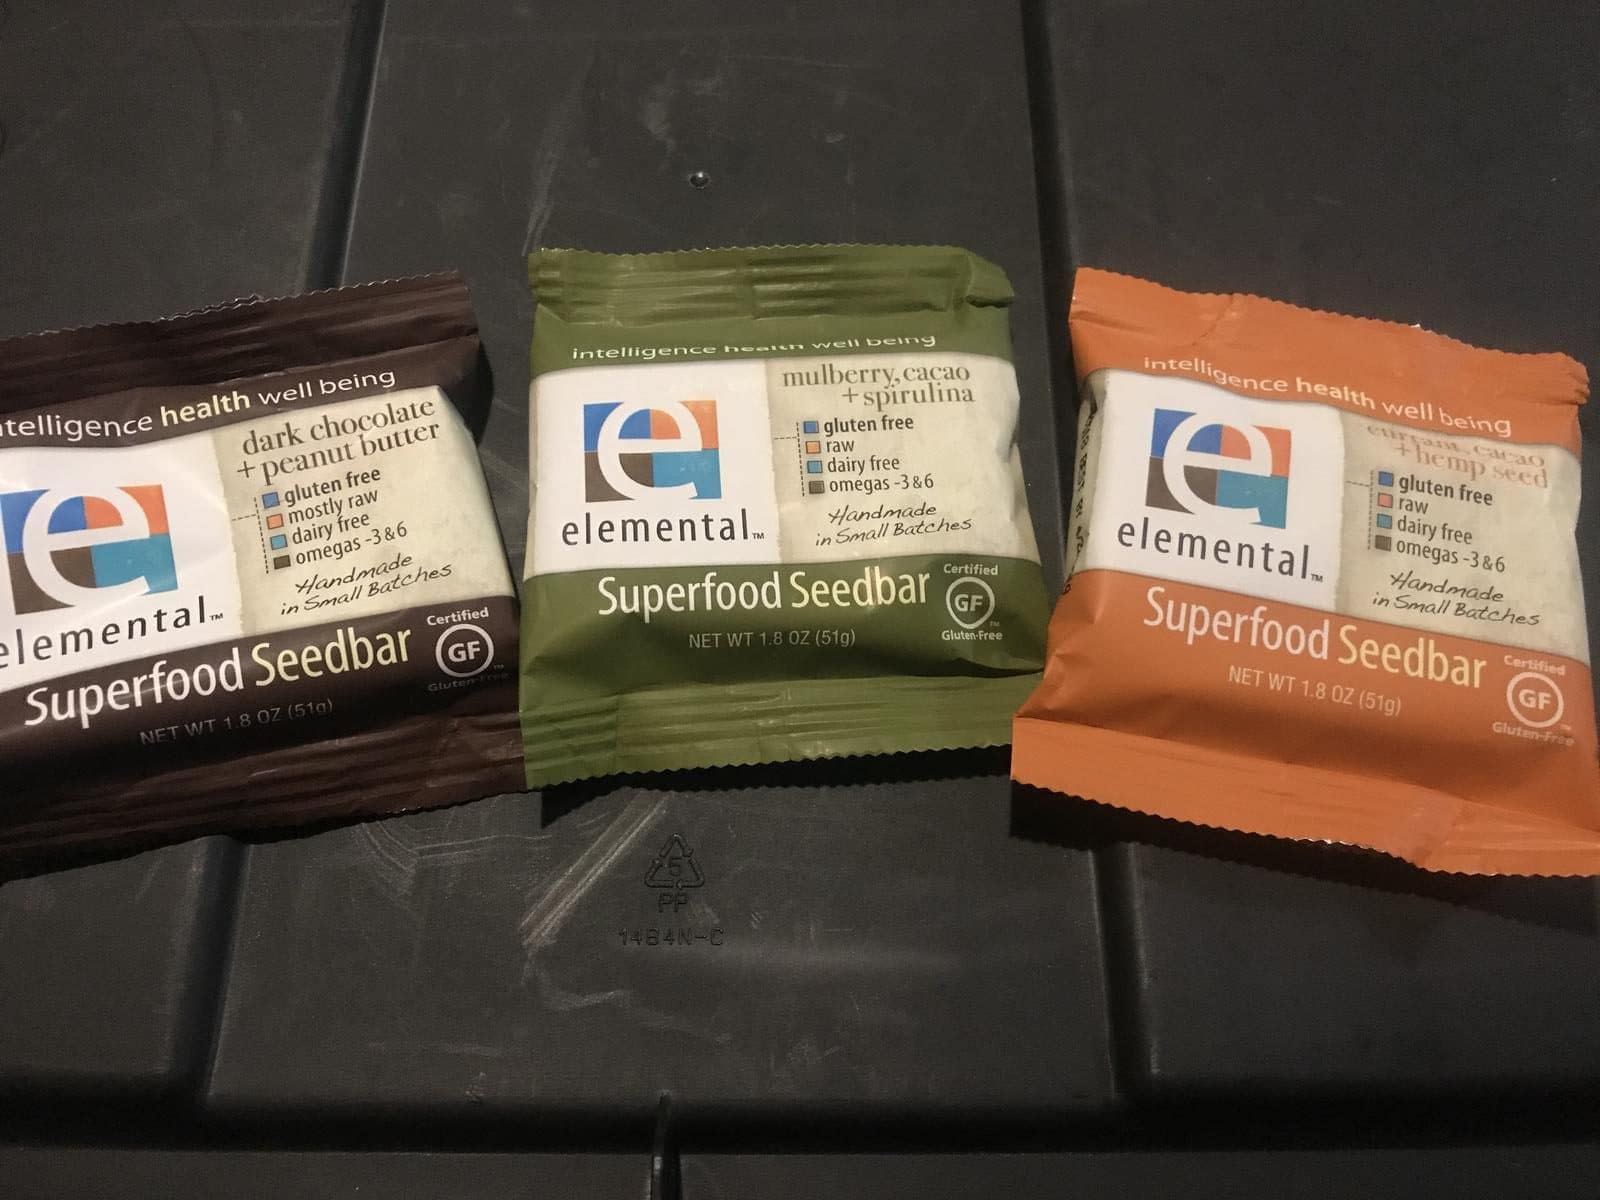 Elemental Superfood Seed bars from Elemental Raw